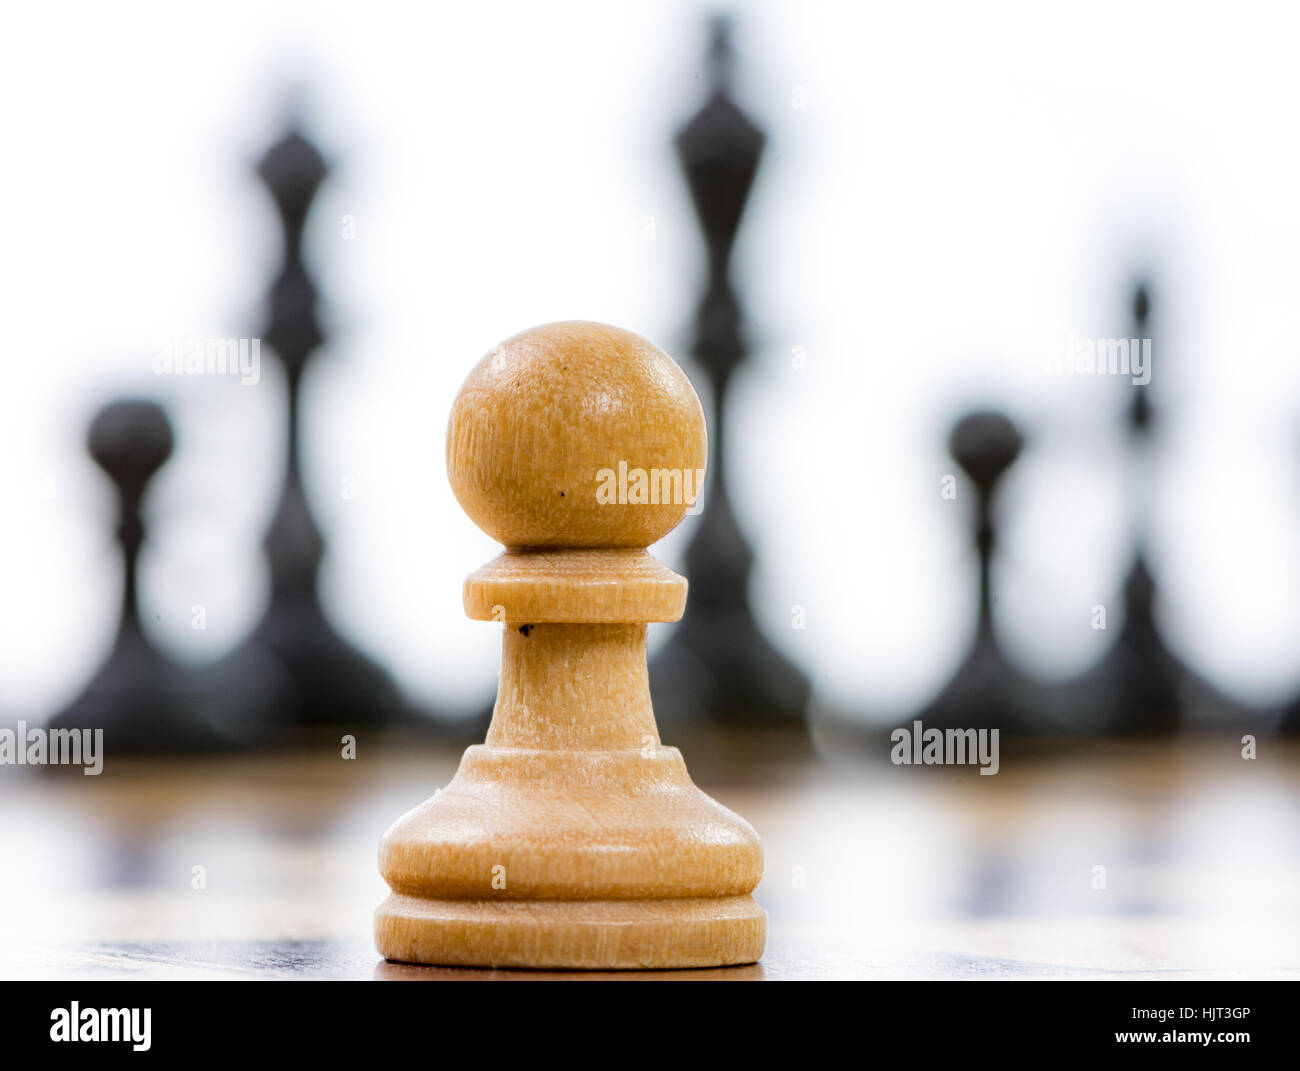 White pawn against a superiority of black chess pieces on a chess board. Selective focus. Stock Photo